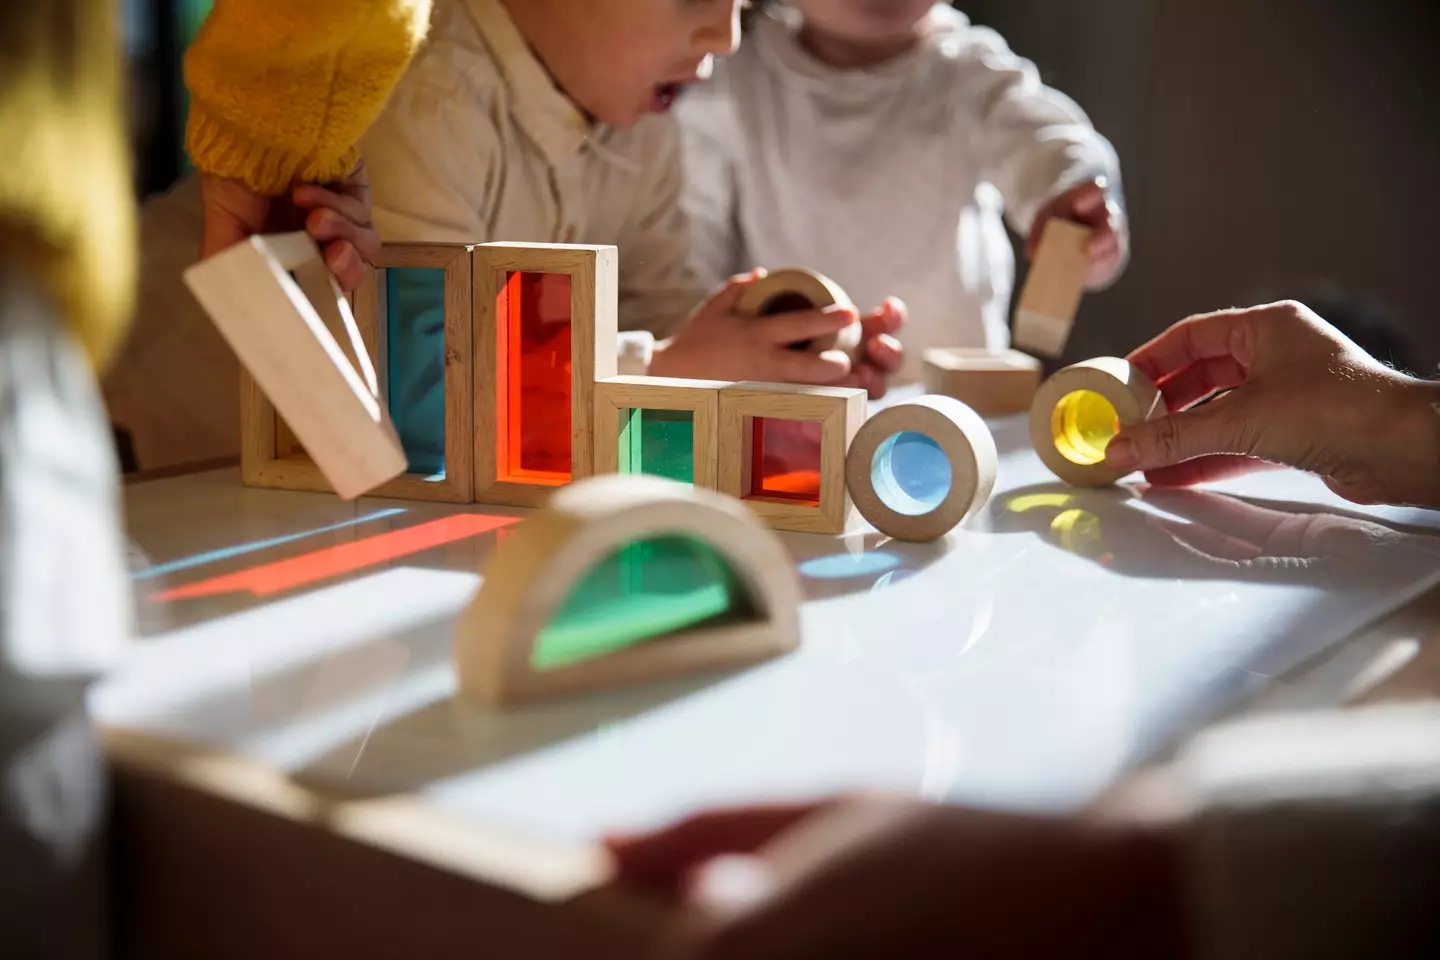 There is a major 'lack of affordable childcare' in the UK.